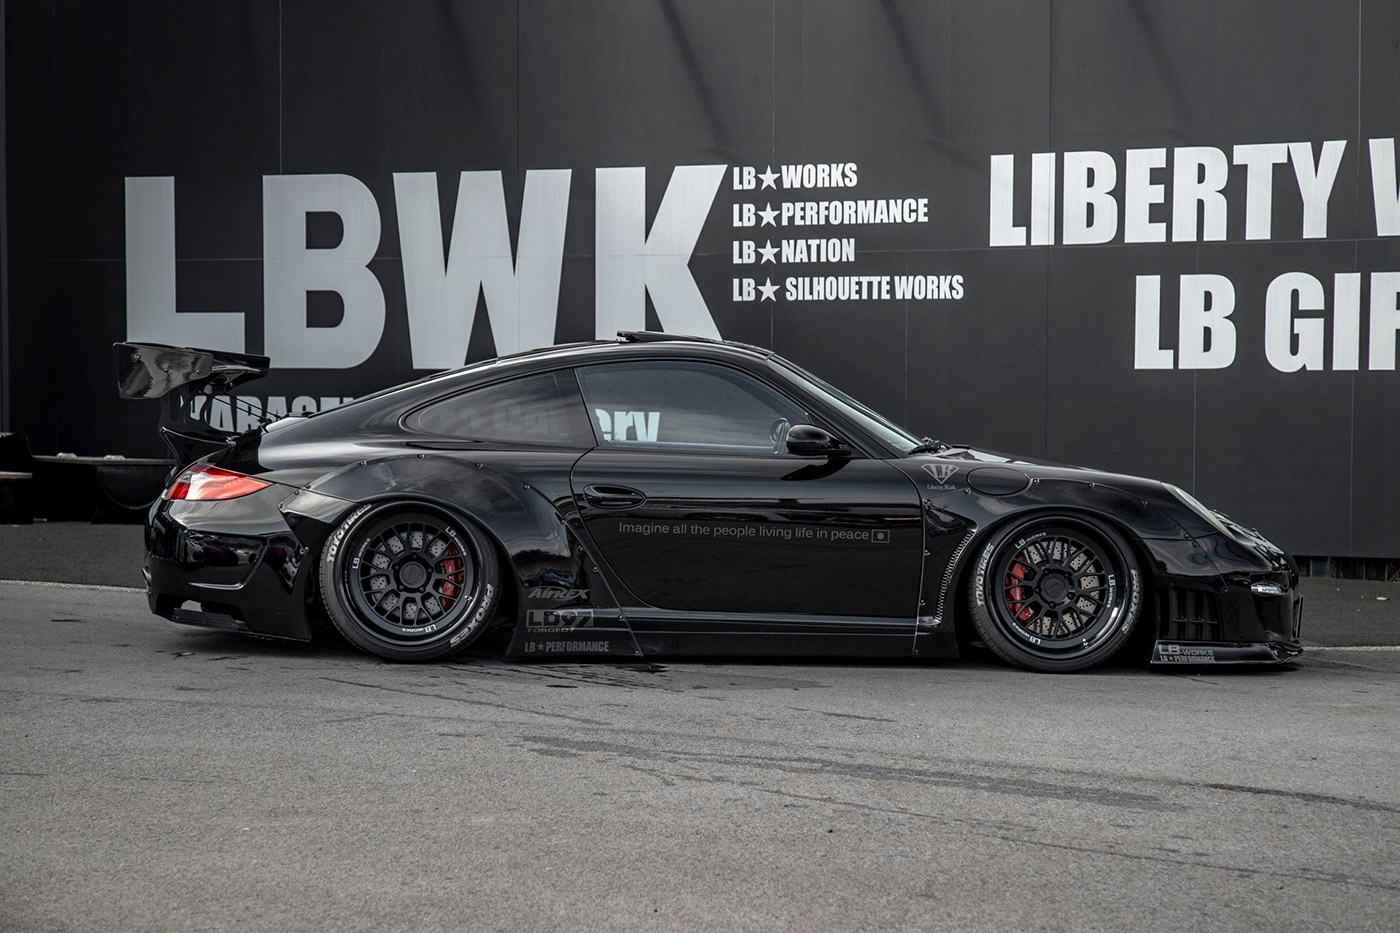 LB-WORKS PORSCHE 991 Carrera S Full Complete - Liberty Walk | リバティーウォーク  Complete car and customize!